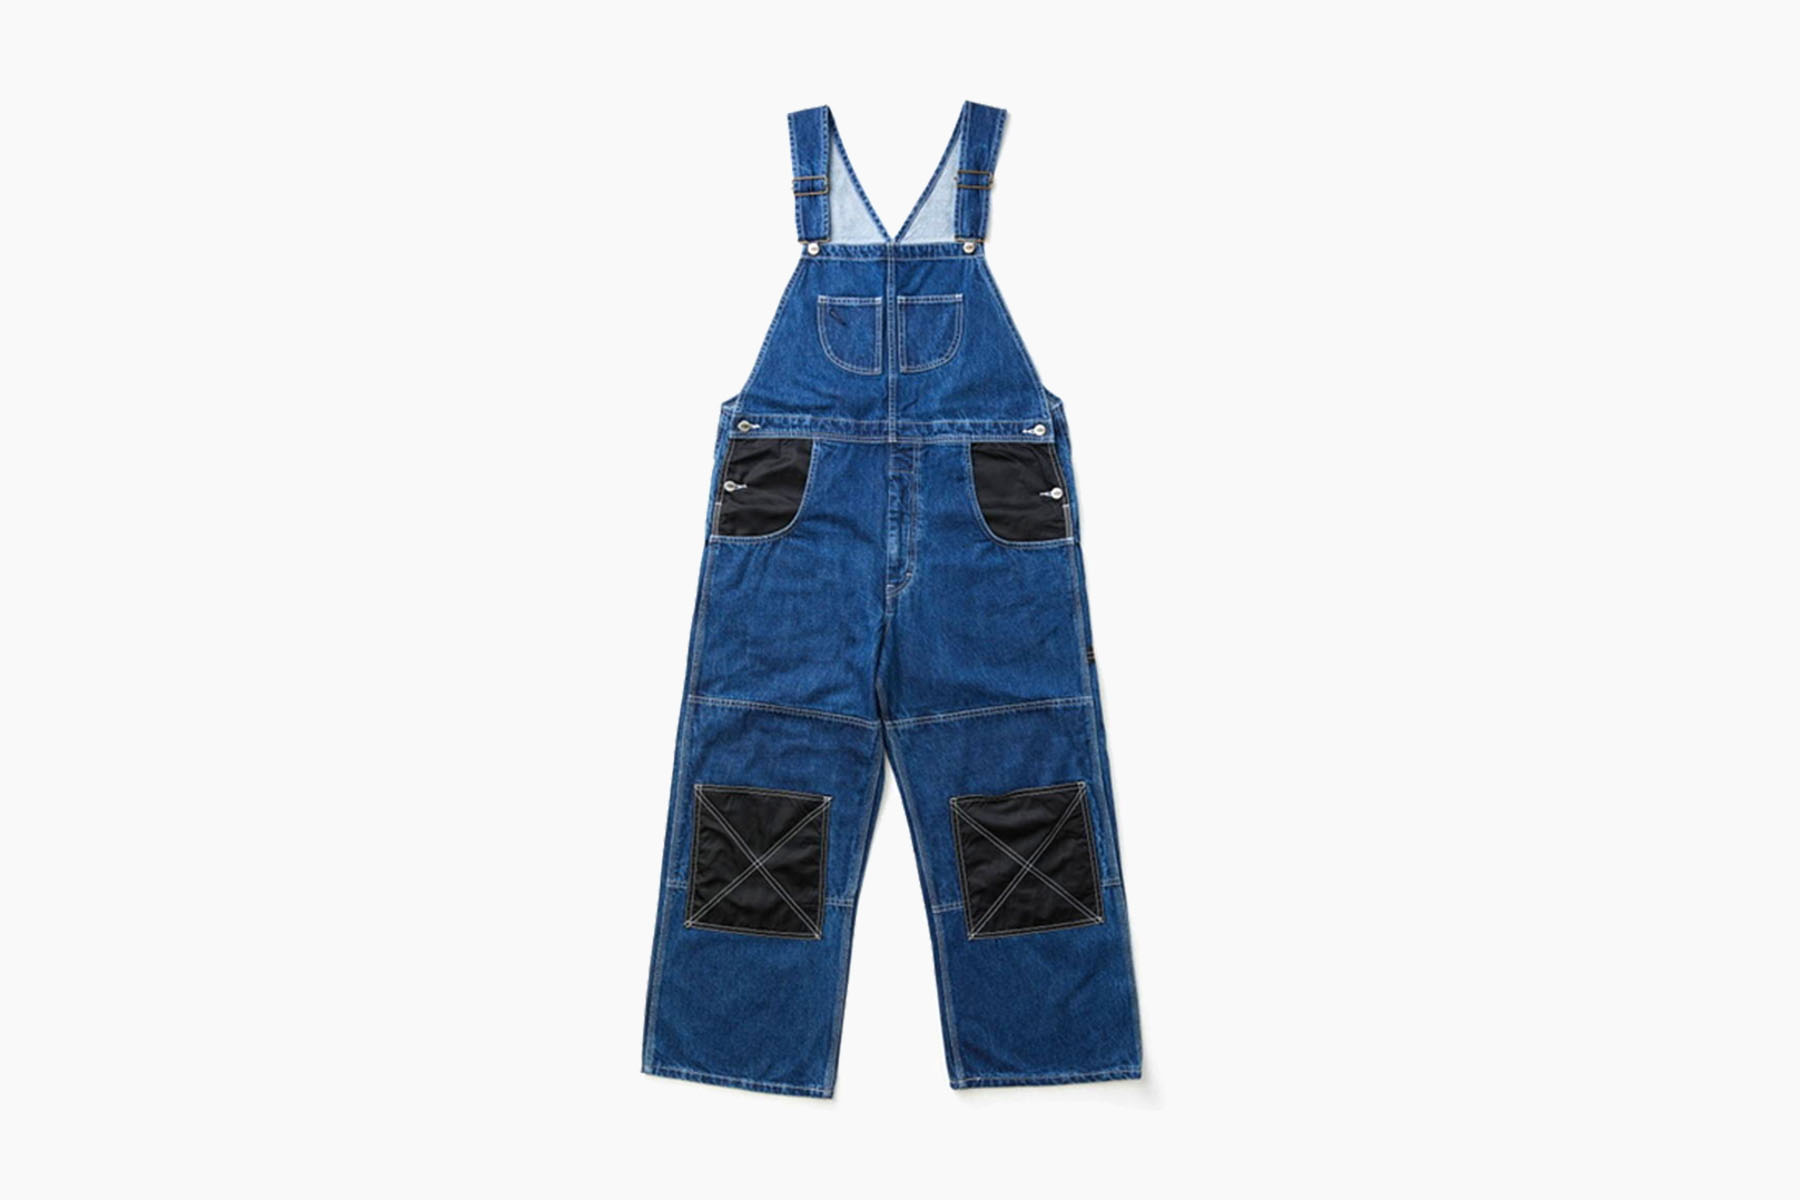 Pipes x Lee Denim Overalls